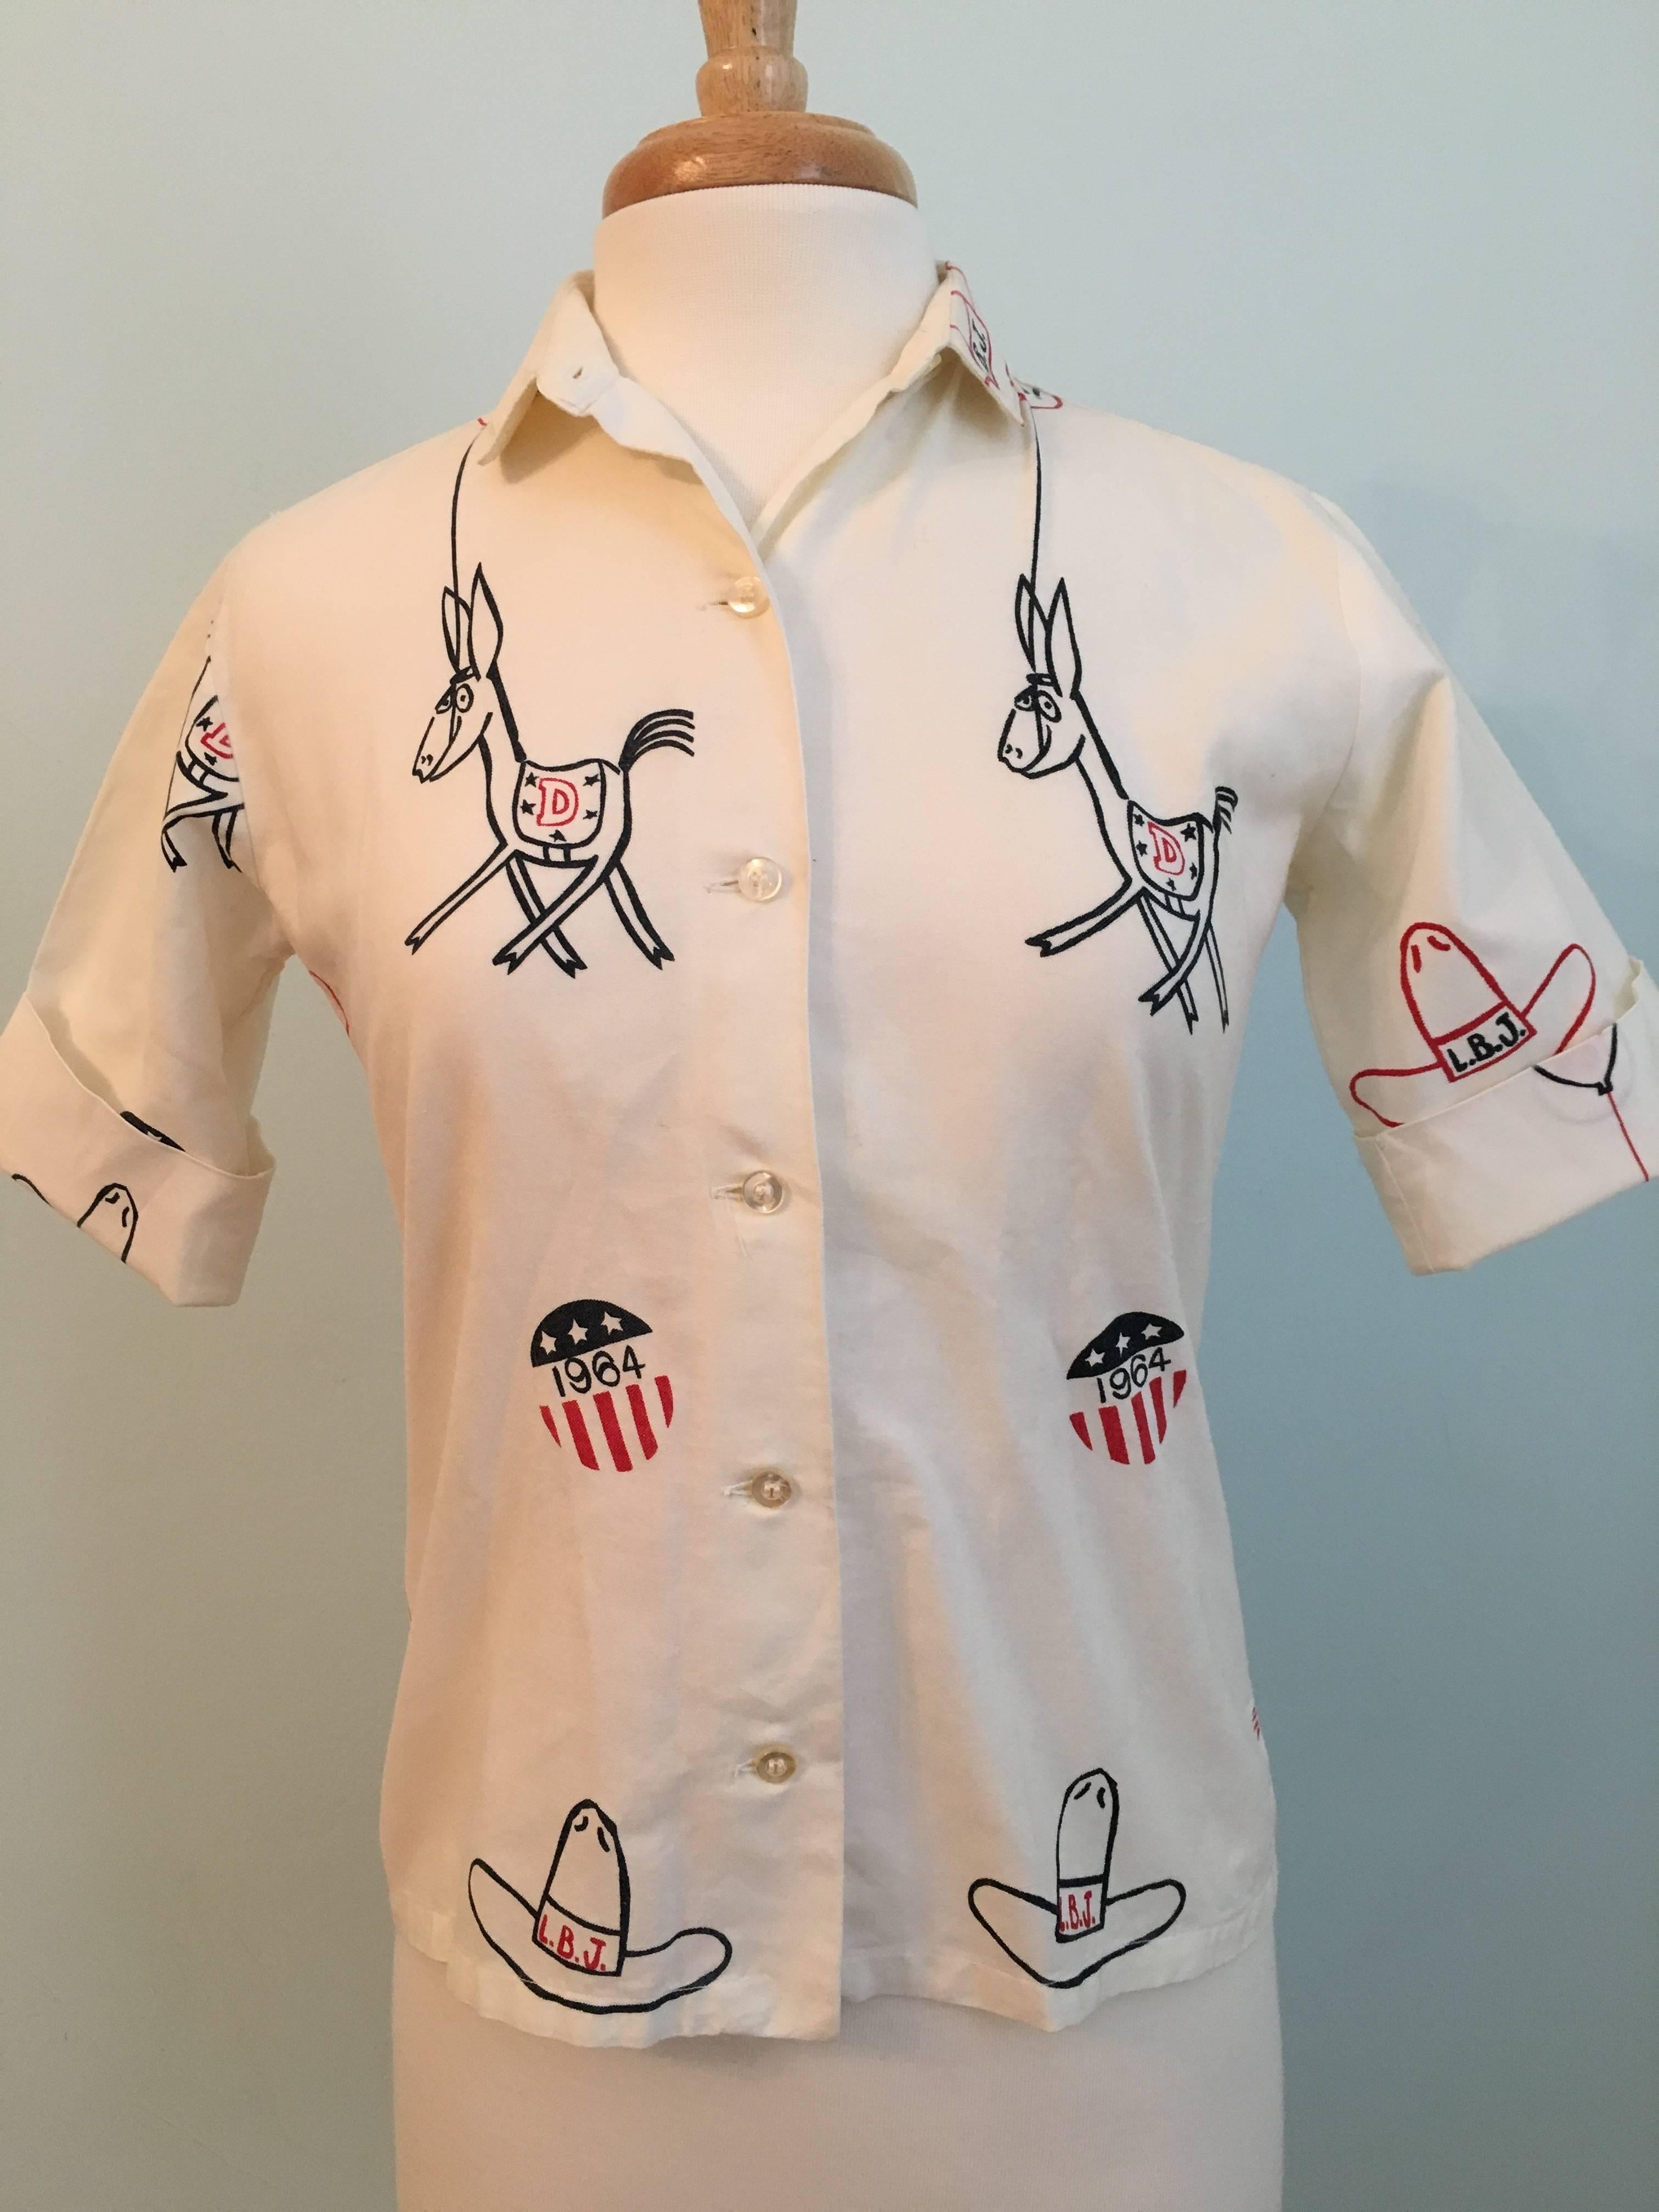 This blouse was made by the Vested Gentress in 1964 for the Democratic National Convention which took place at the Boardwalk Hall in Atlantic City, N.J. from August 24th - 27th, 1964. It features hand silk-screened donkeys holding balloons, cowboy